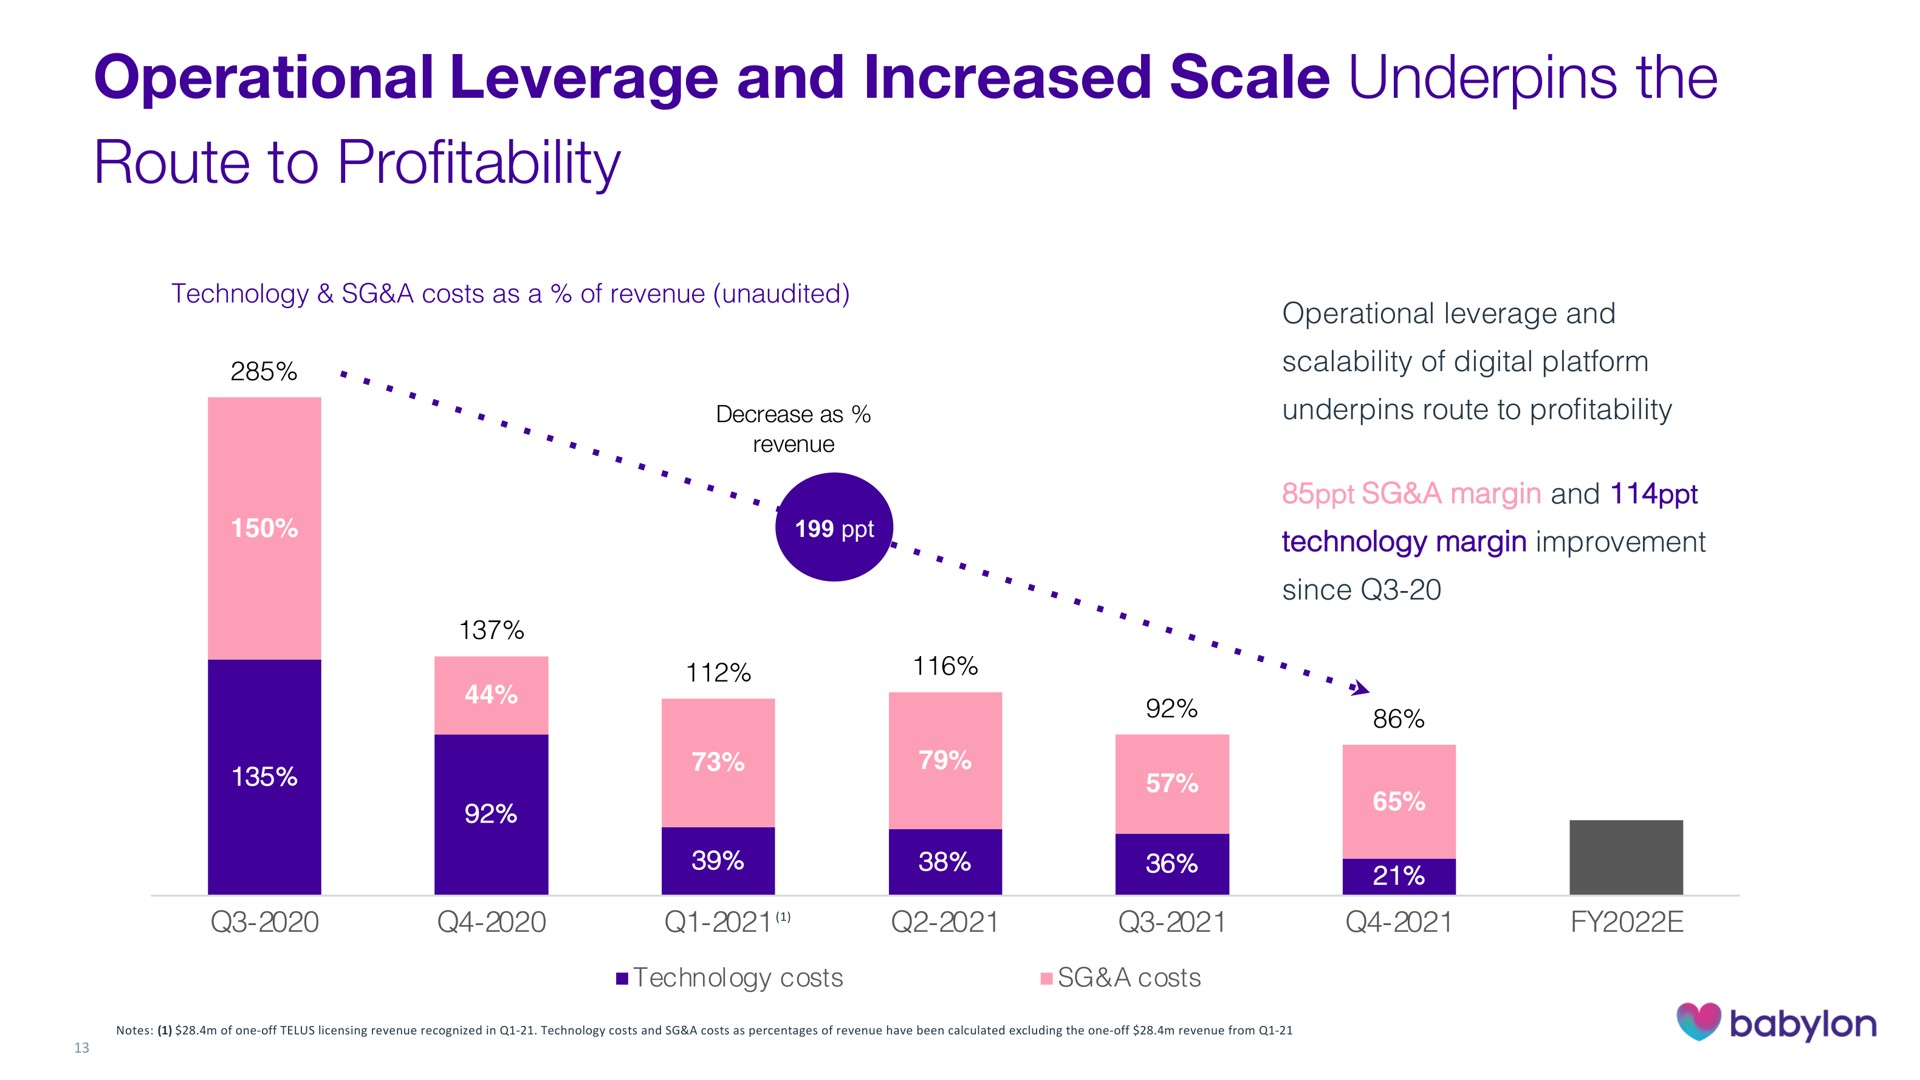 operational leverage and increased scale underpins the route to profitability | Babylon